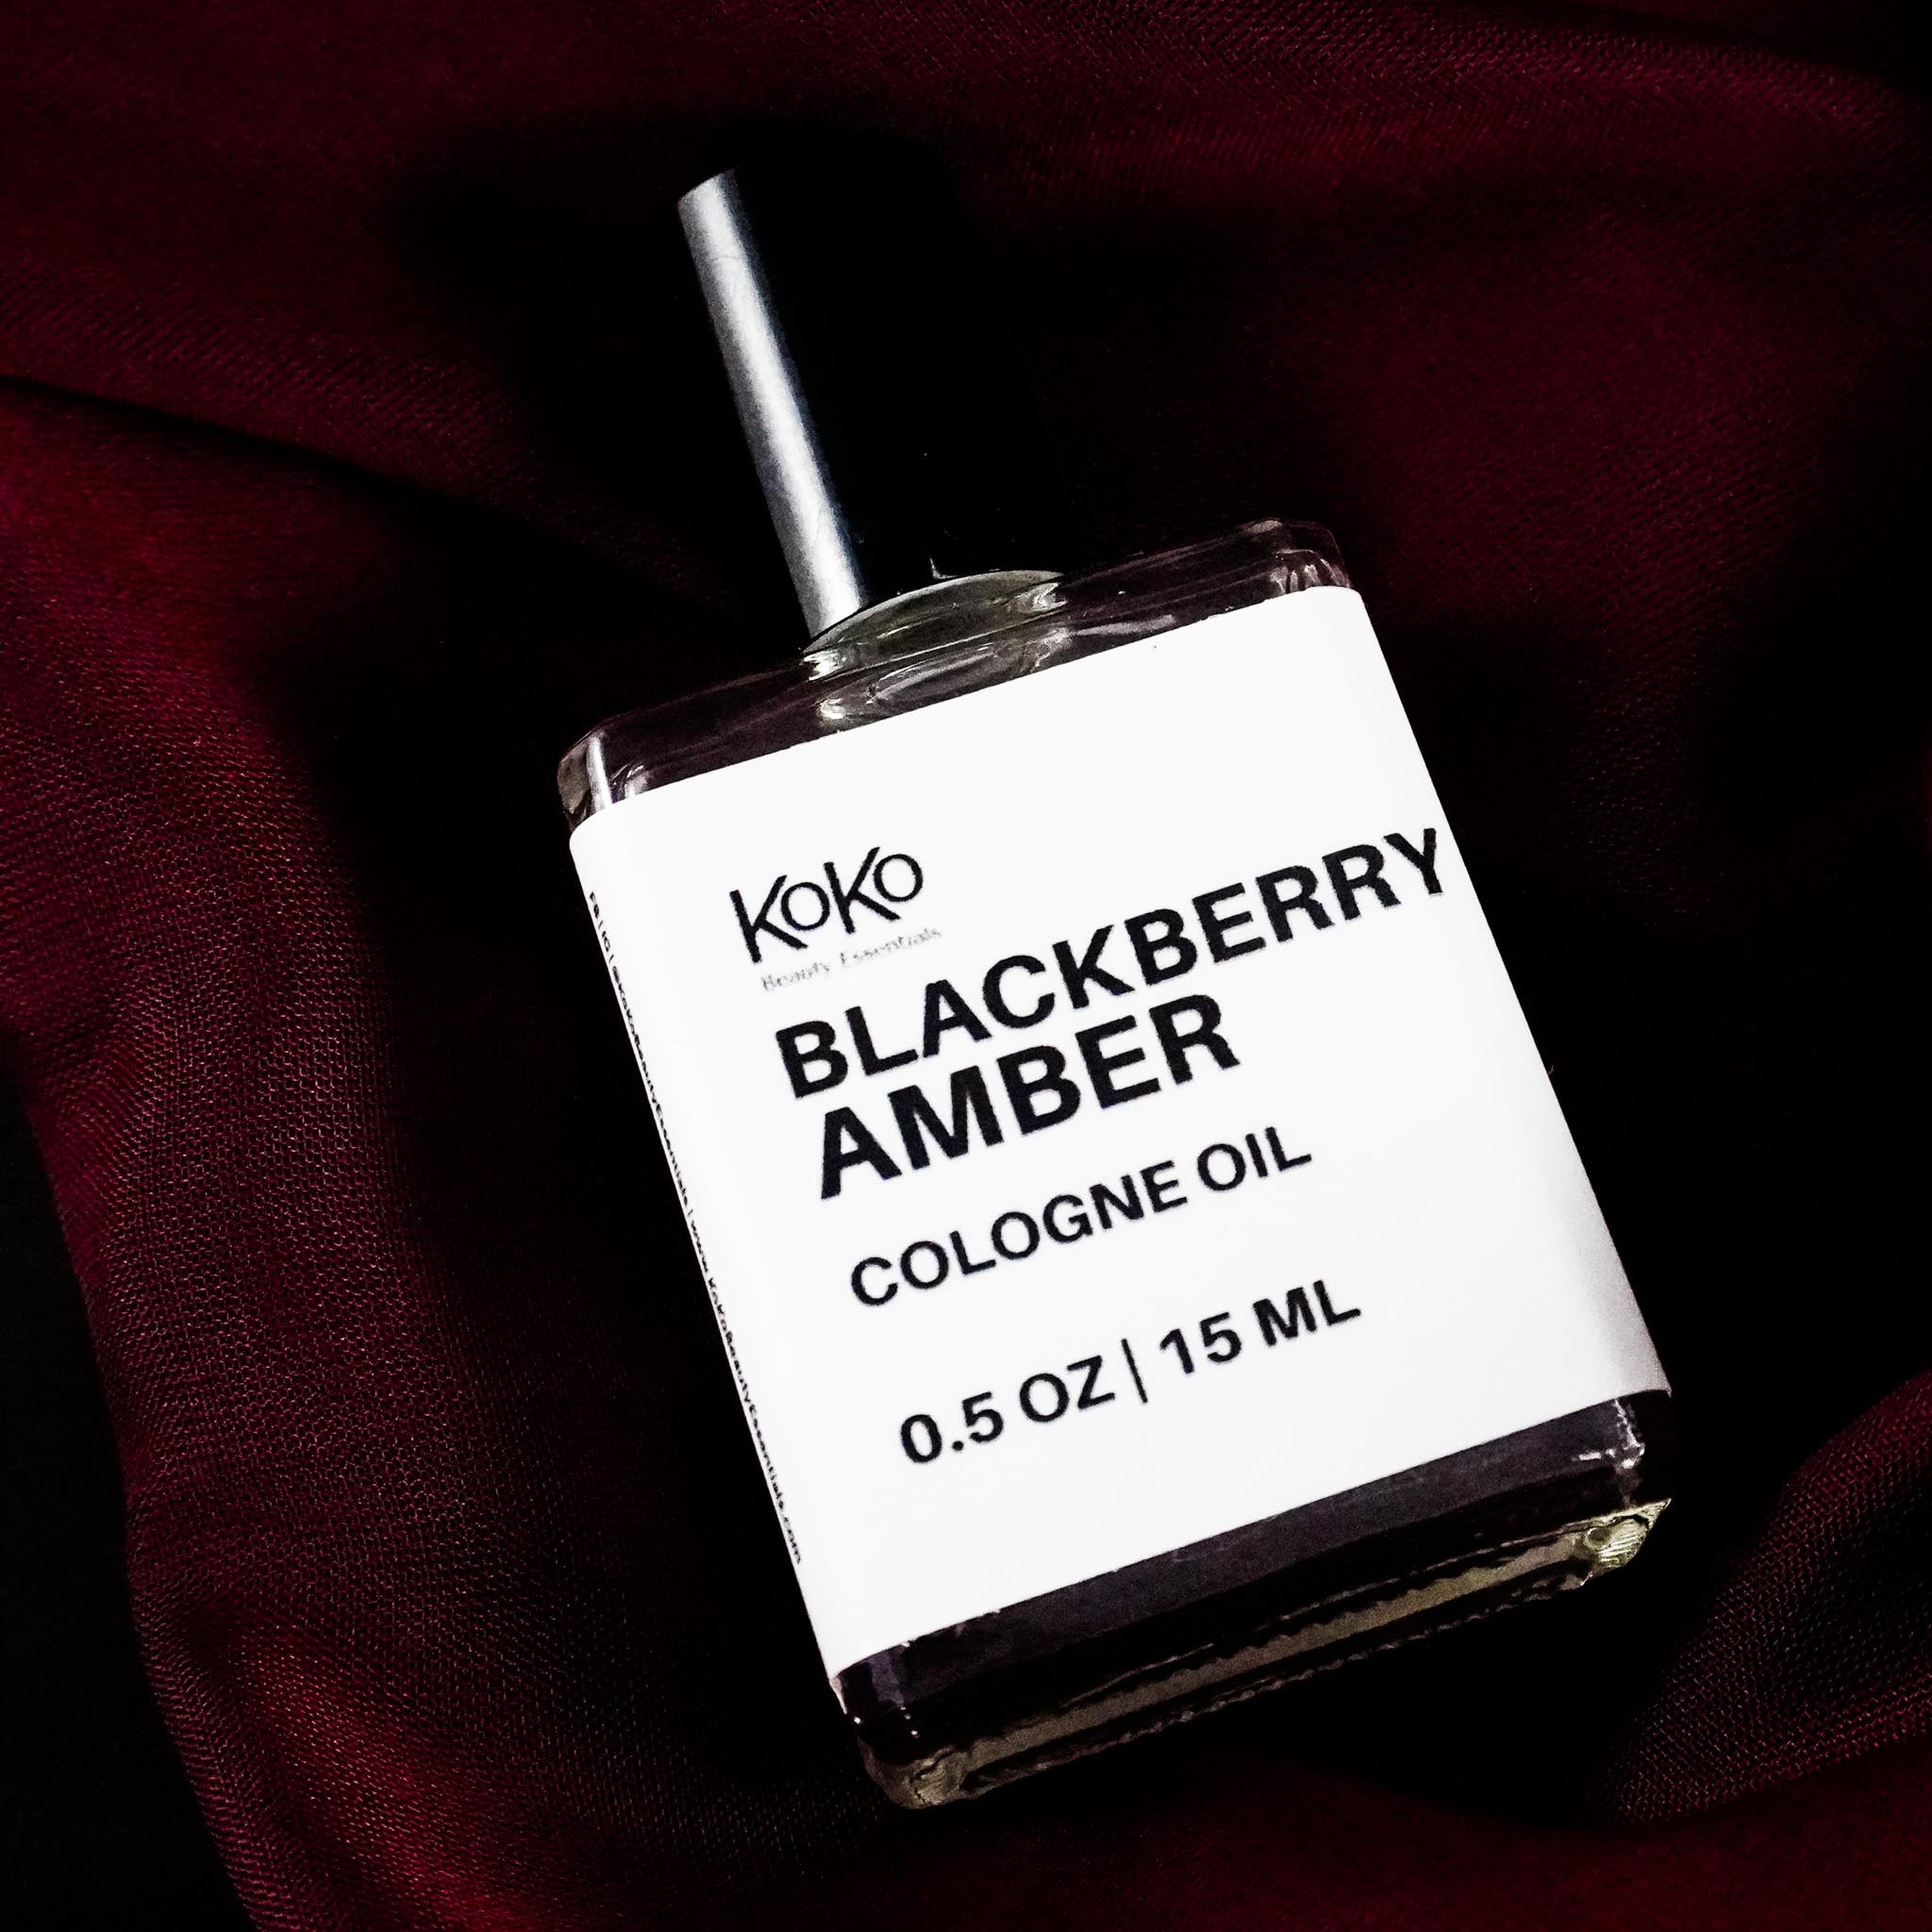 KG's Amber Oil Scent · GLW